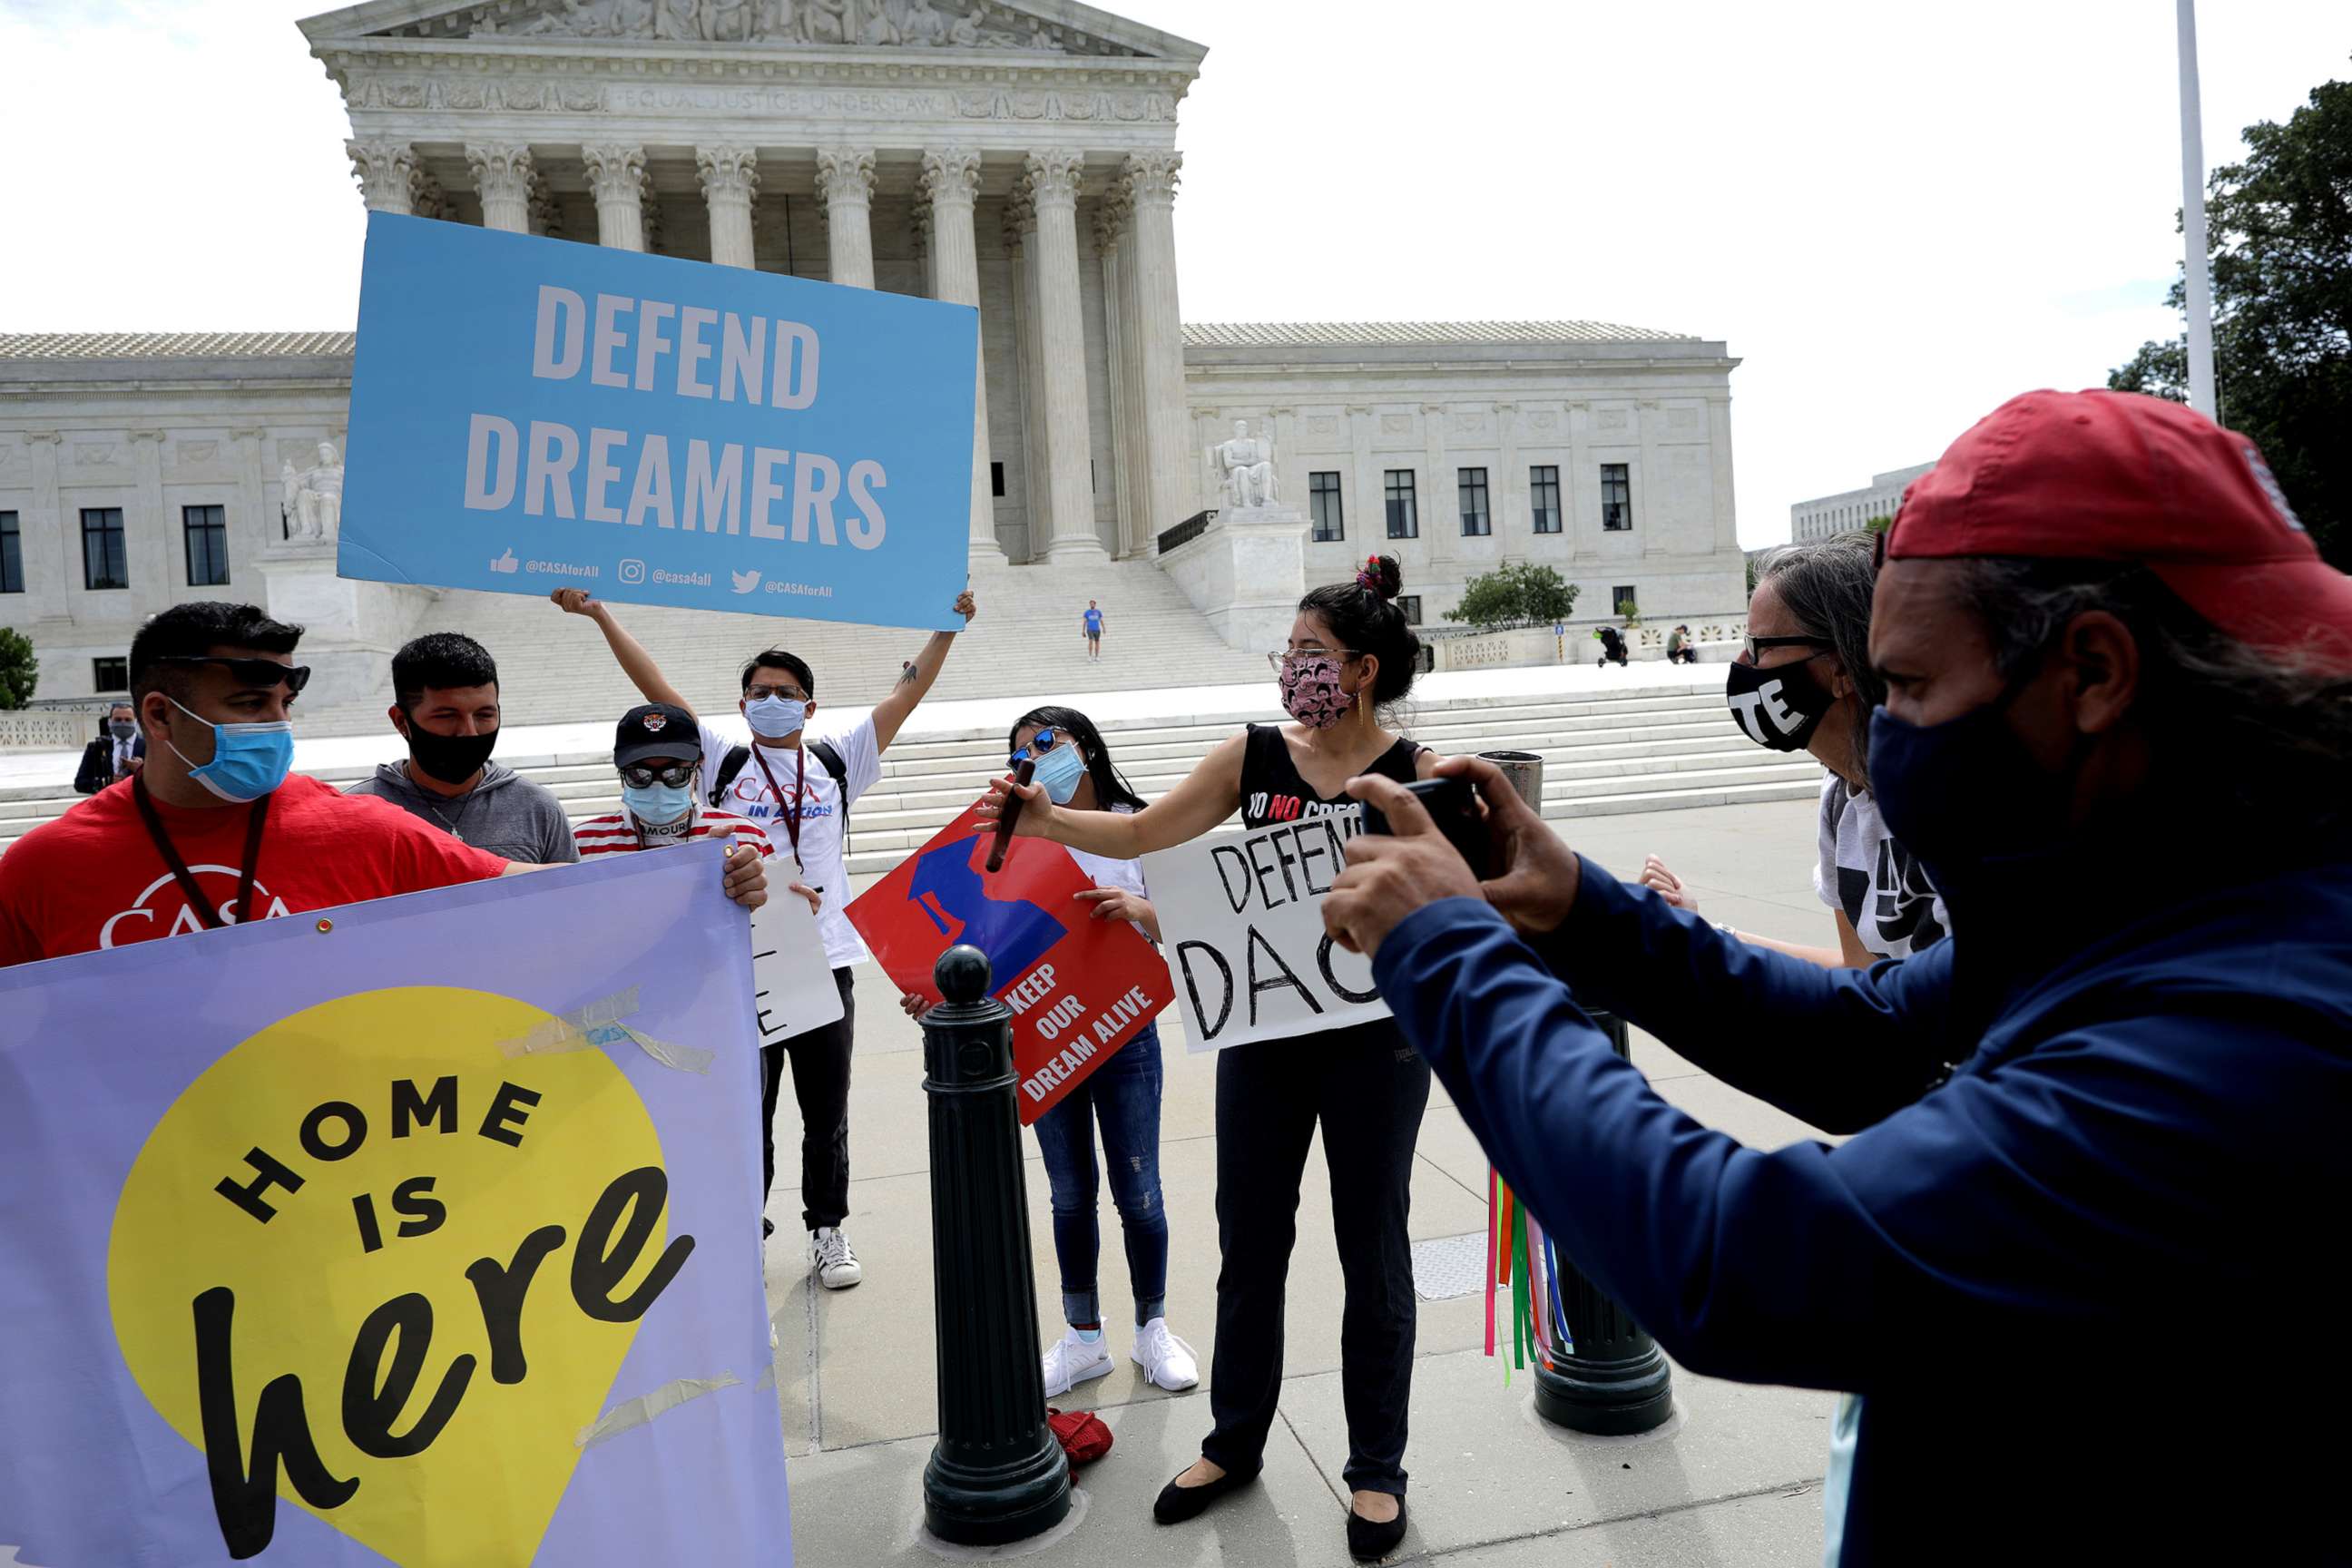 PHOTO: Advocates for immigrants with Deferred Action for Childhood Arrivals, or DACA, rally in front of the U.S. Supreme Court, June 15, 2020, in Washington, D.C.